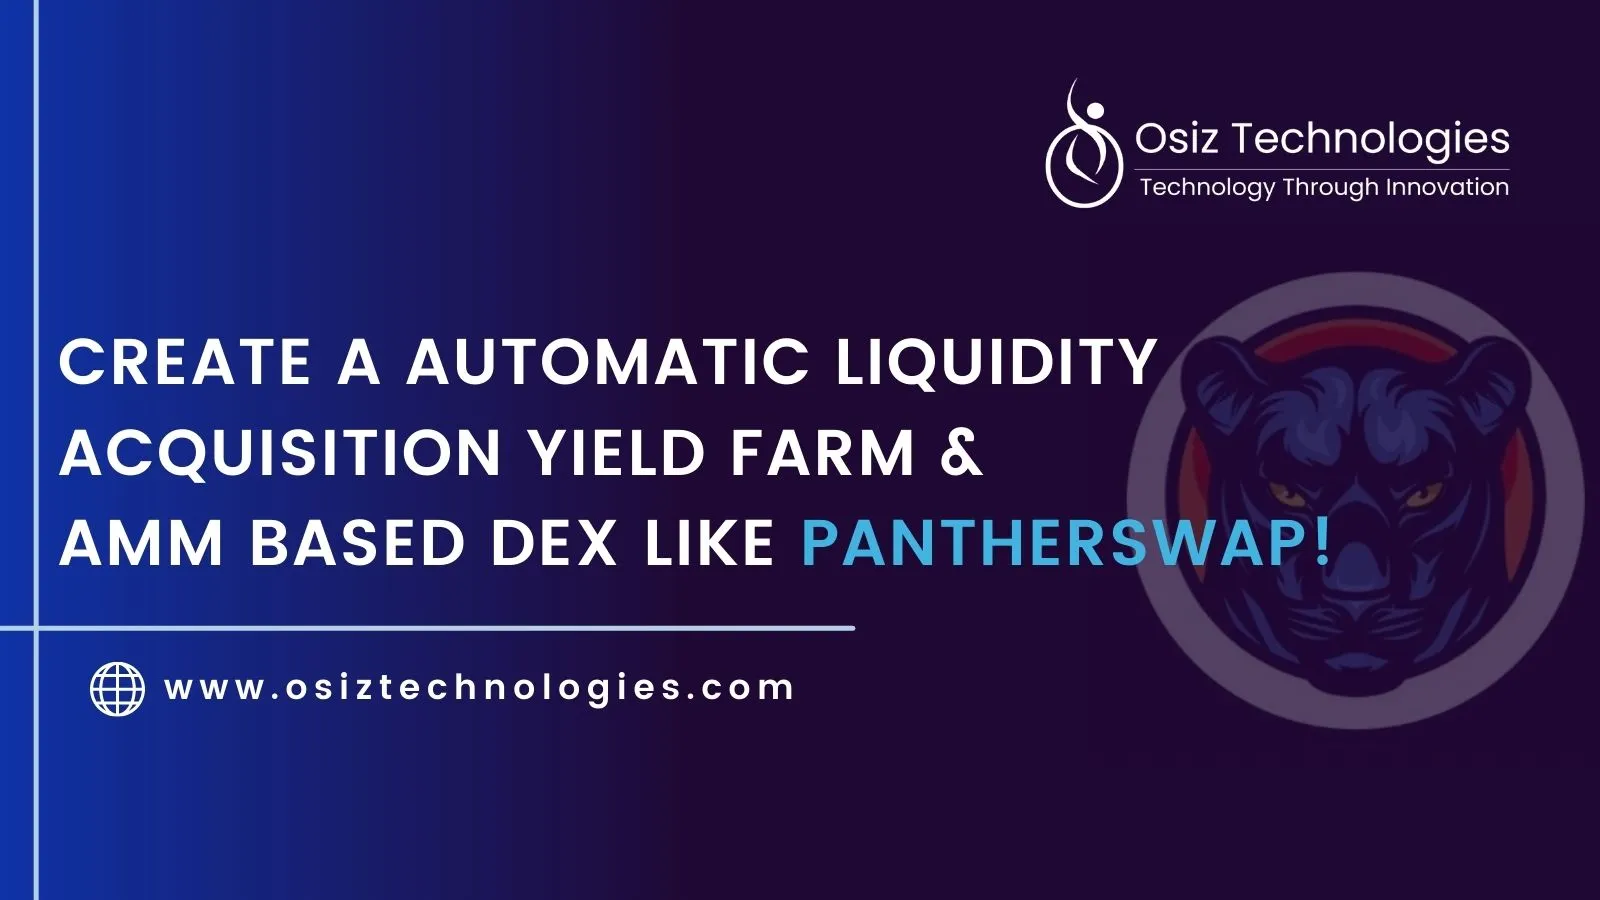 Create An Automatic Liquidity Acquisition Yield Farm & AMM based DEX like PantherSwap